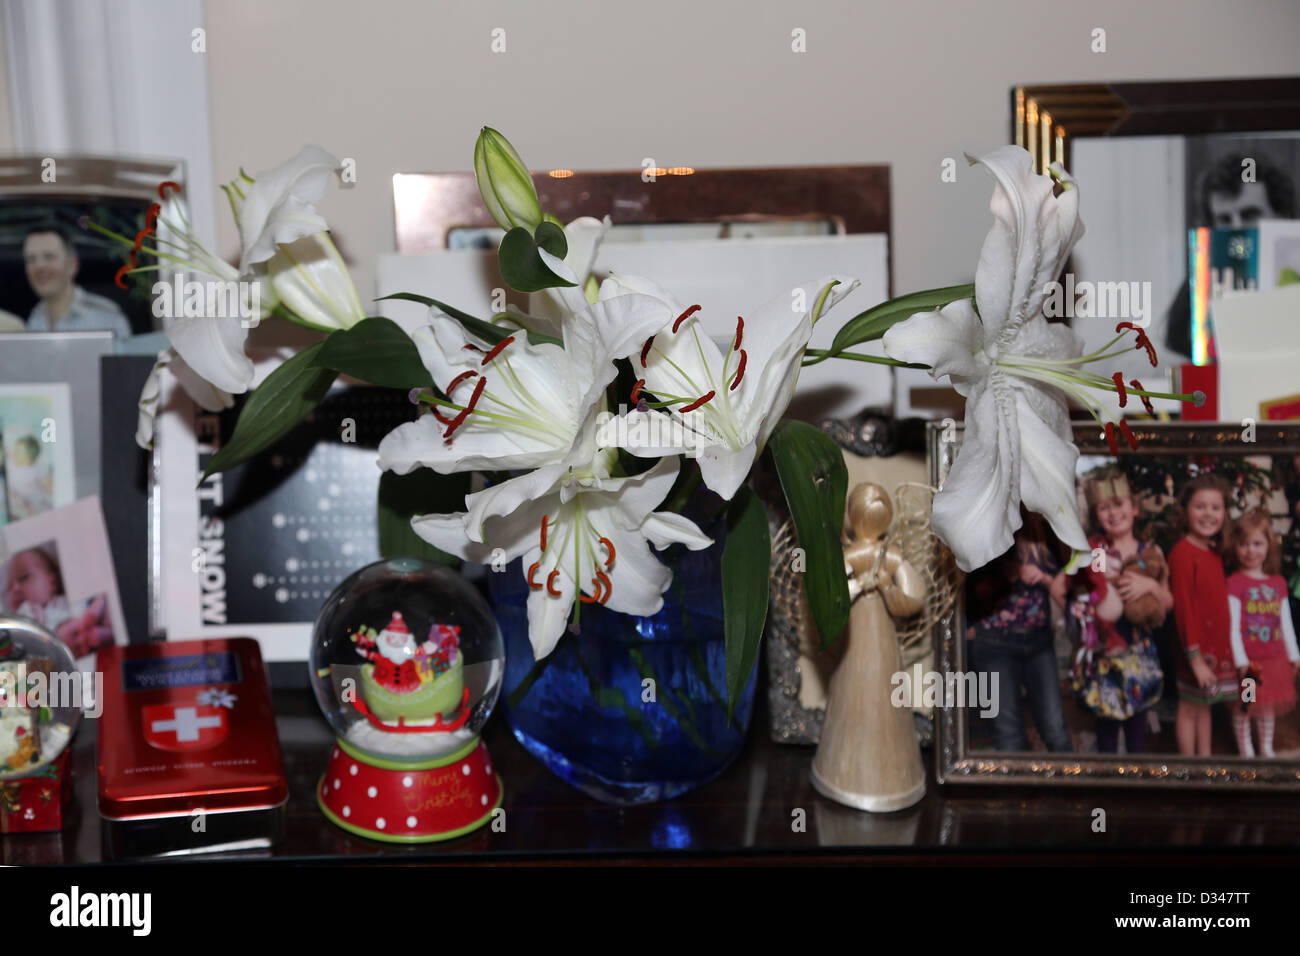 Lillies In A vase By Photographs And Ornaments Stock Photo